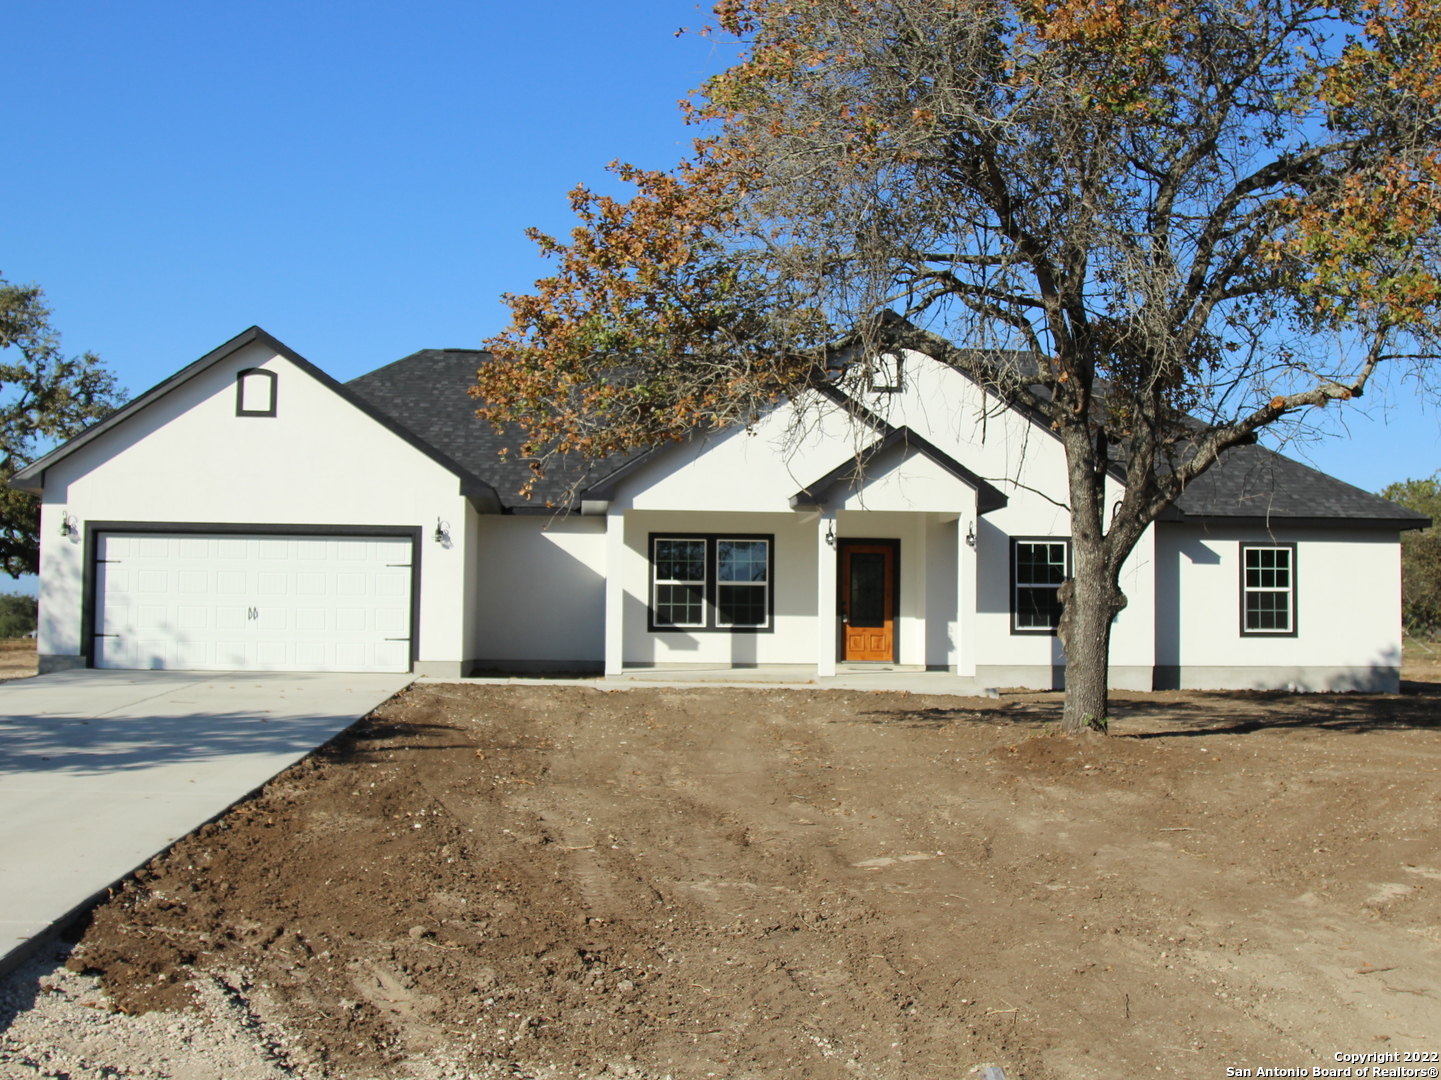 Home is under construction - sample pictures only. To be completed September - October time frame. Beautiful 4 bed 2.5 bath with an office in the much in demand subdivision of Granburg on .75 acres. Just minutes from Lytle near I-35. Exterior will feature stone and stucco with a large covered front porch and covered rear patio. Tile throughout with carpet in the bedrooms, sep tub and shower, large island kitchen, huge living room and spacious dining and bedrooms. Other features include auto garage opener, water softener connections and insulation around the garage. All measurements are approximate.